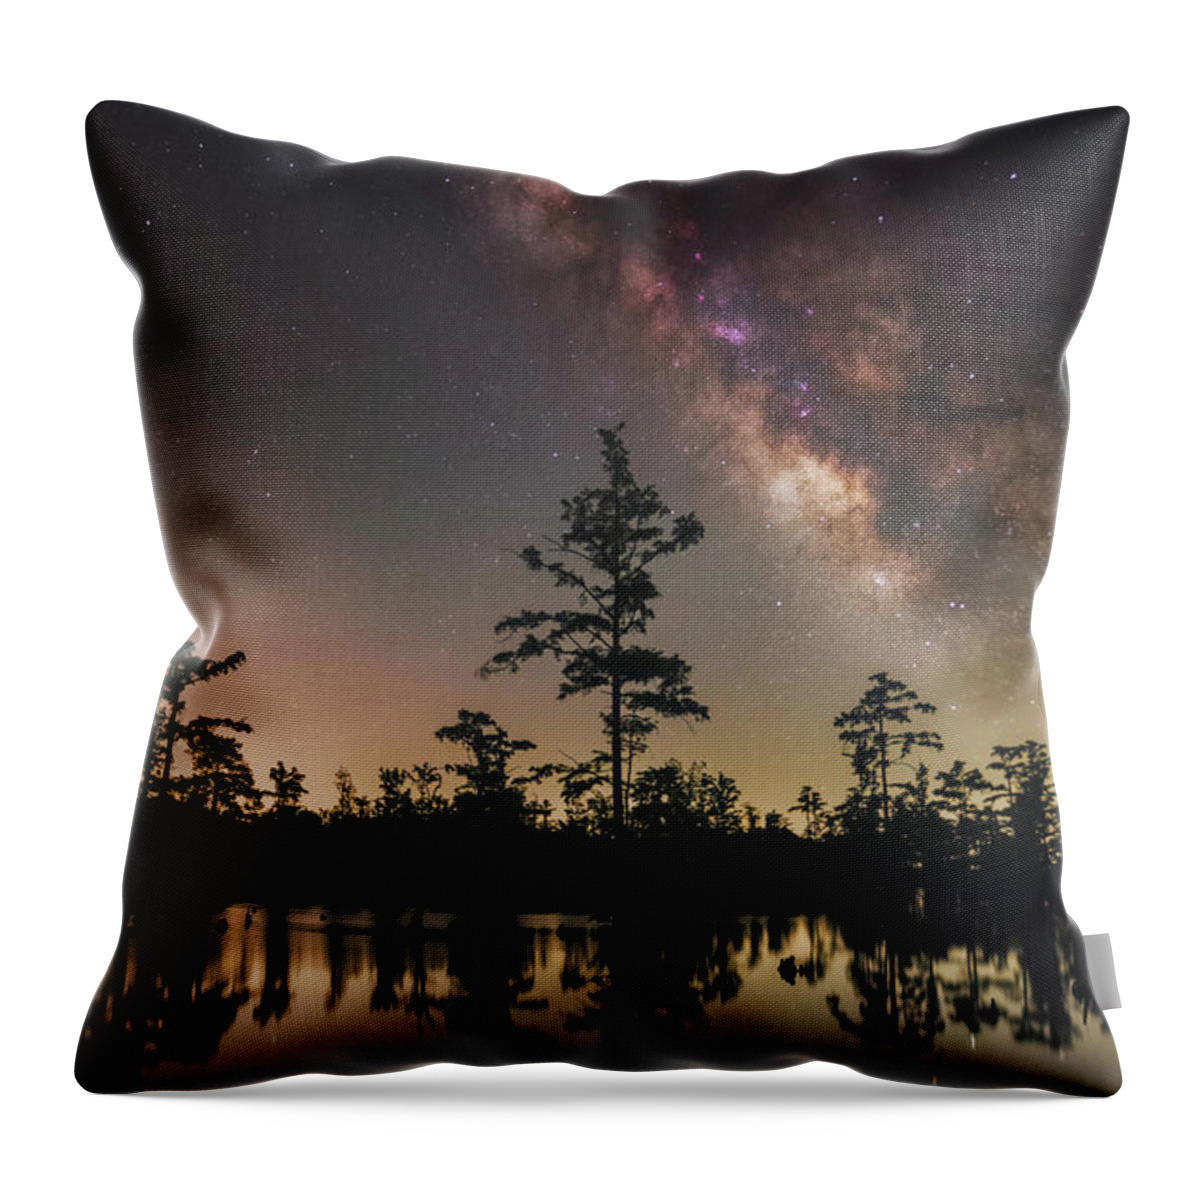 Nightscape Throw Pillow featuring the photograph Horseshoe Lake by Grant Twiss